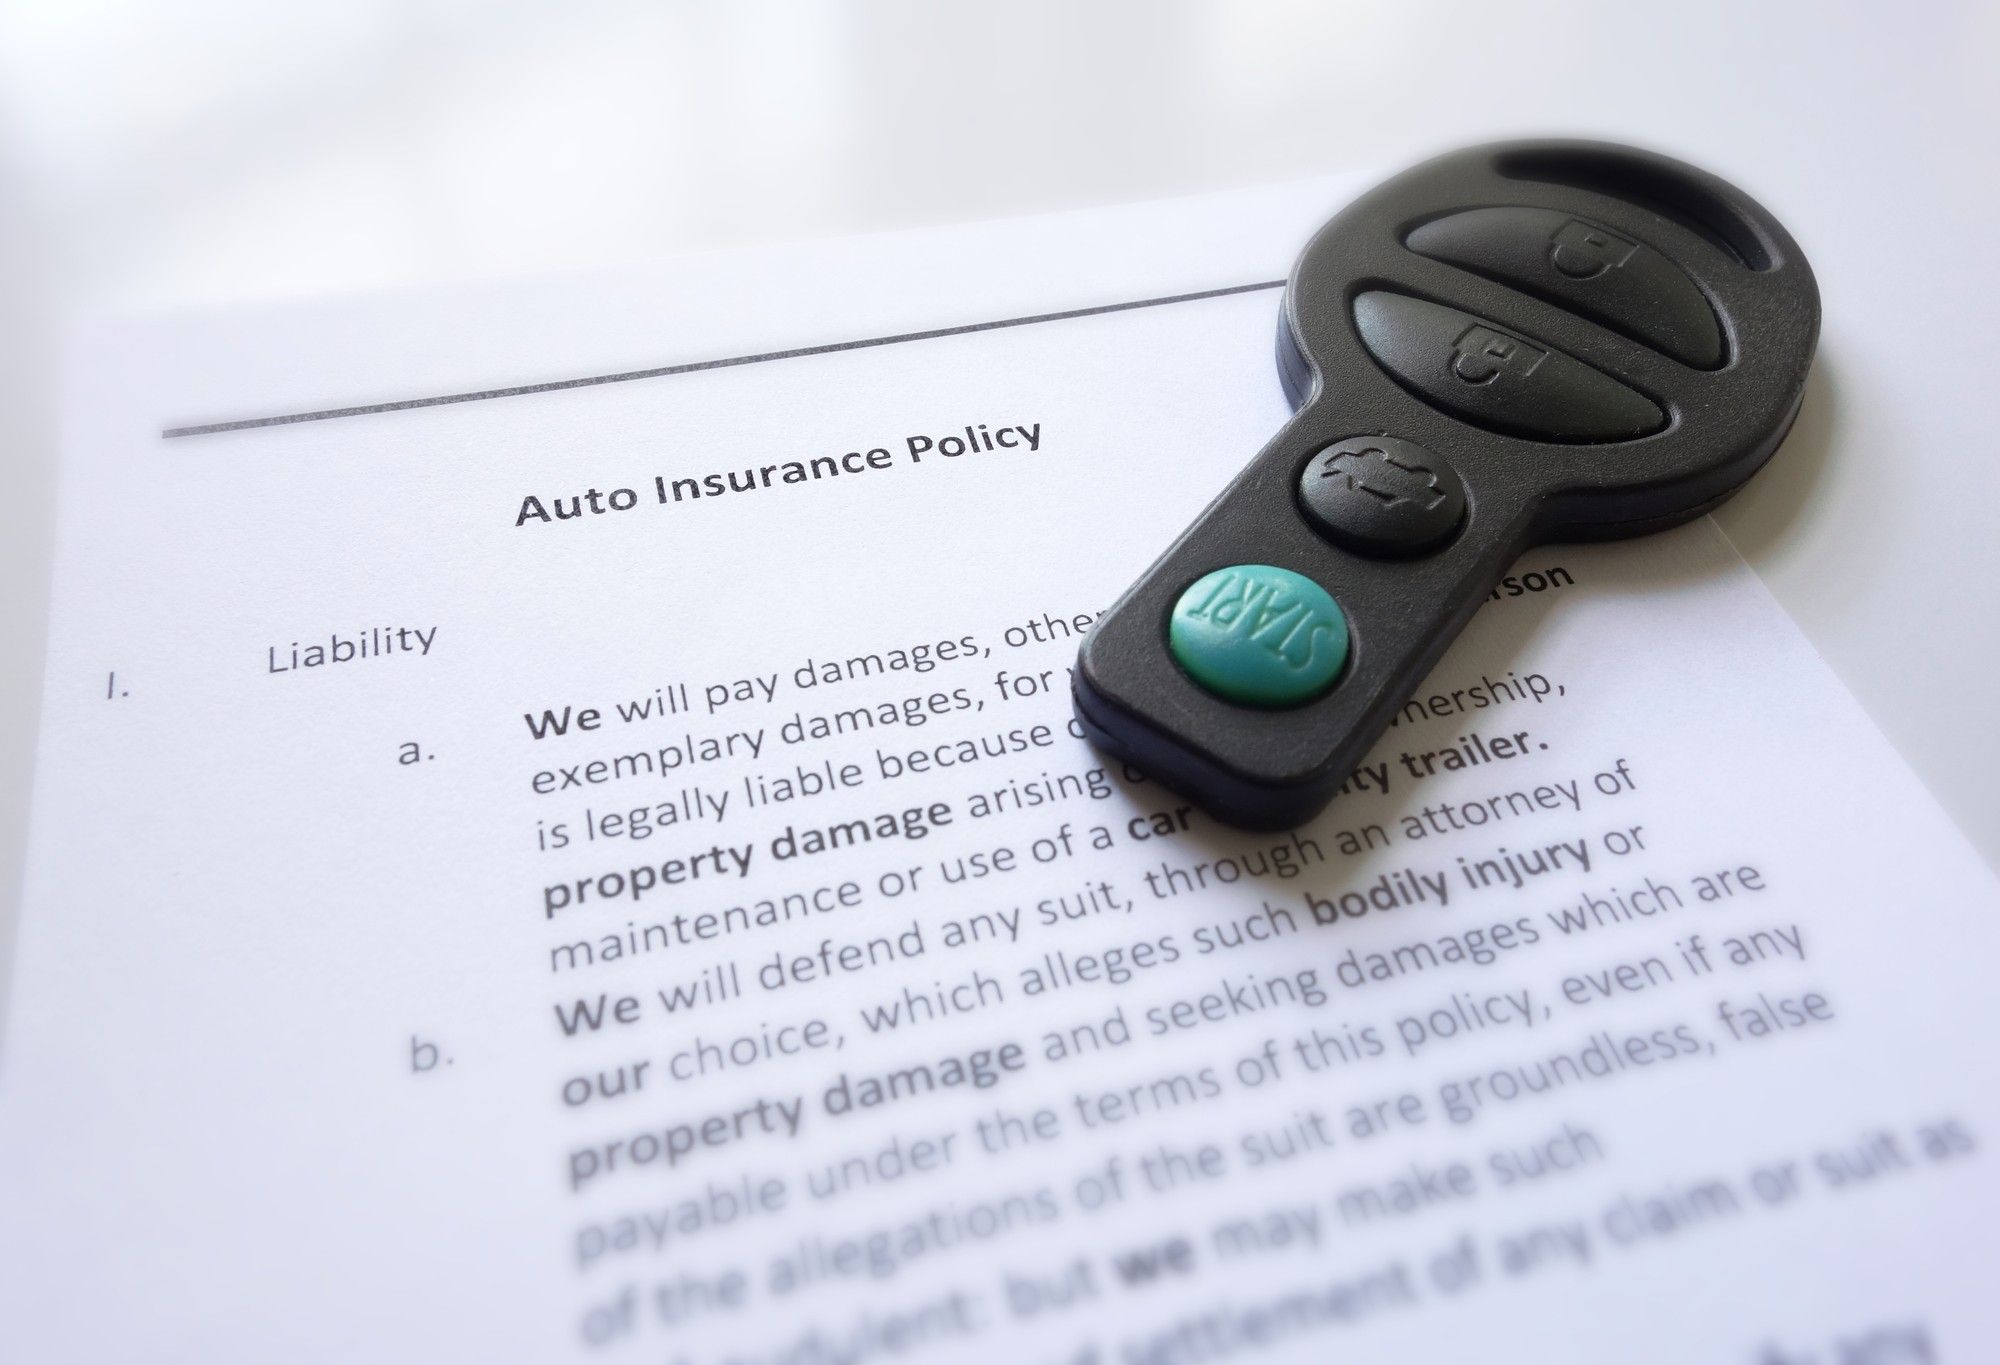 Motor Vehicle Assurance has agreed to a settlement to resolve claims that they violated TCPA.